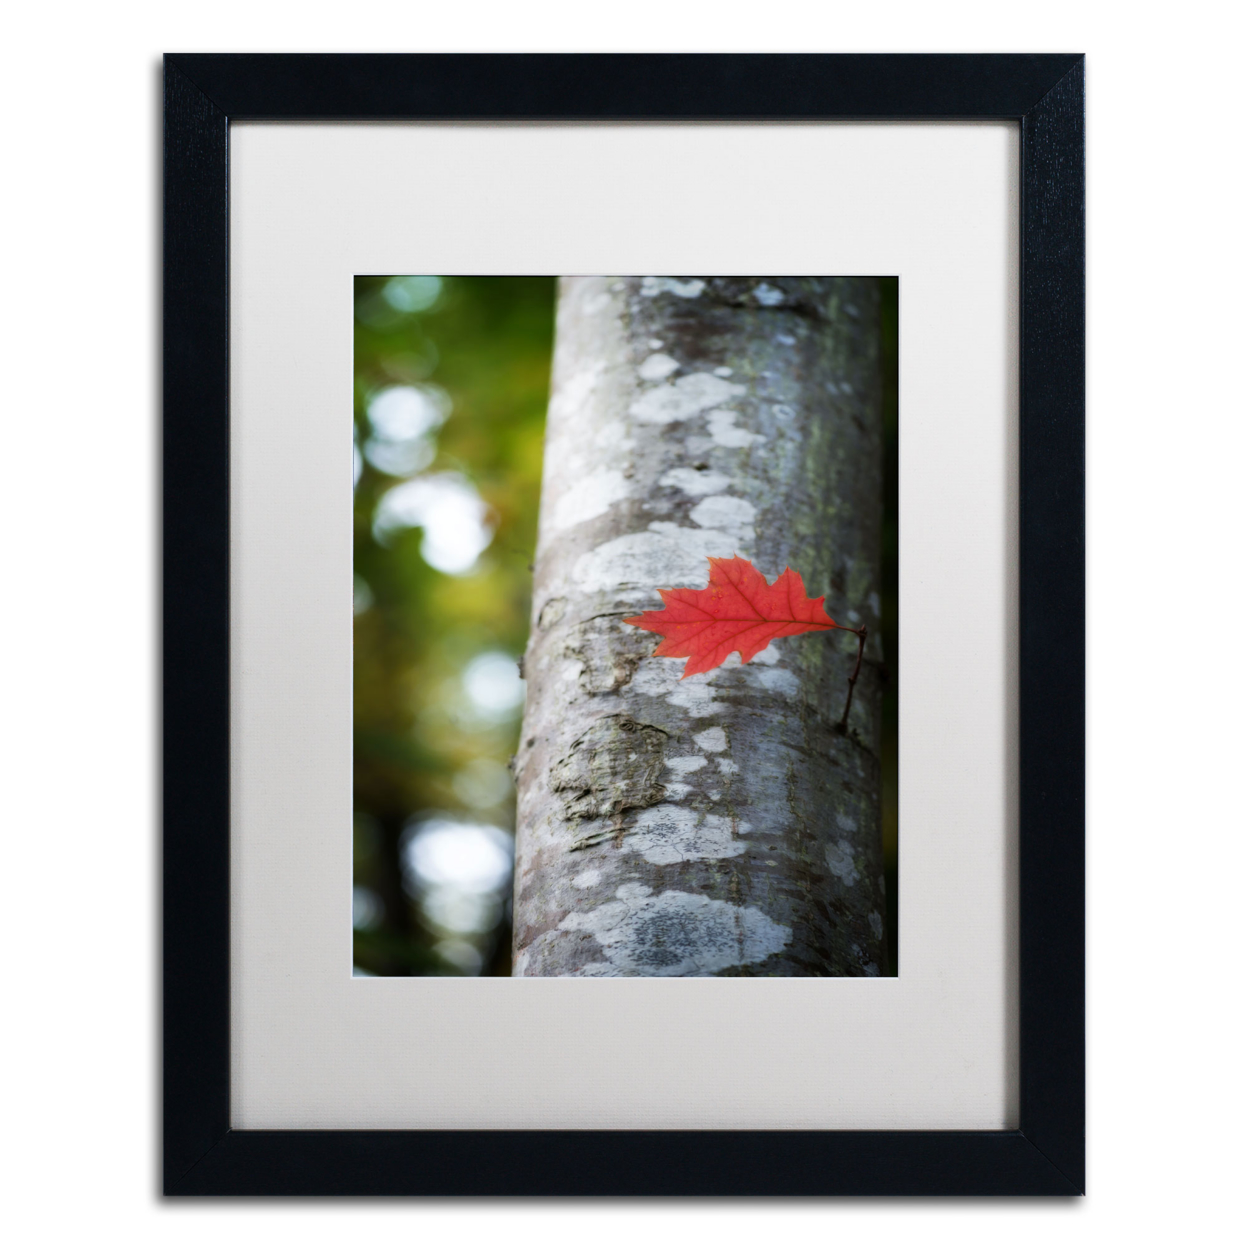 Philippe Sainte-Laudy 'Solitary Red Leaf' Black Wooden Framed Art 18 X 22 Inches